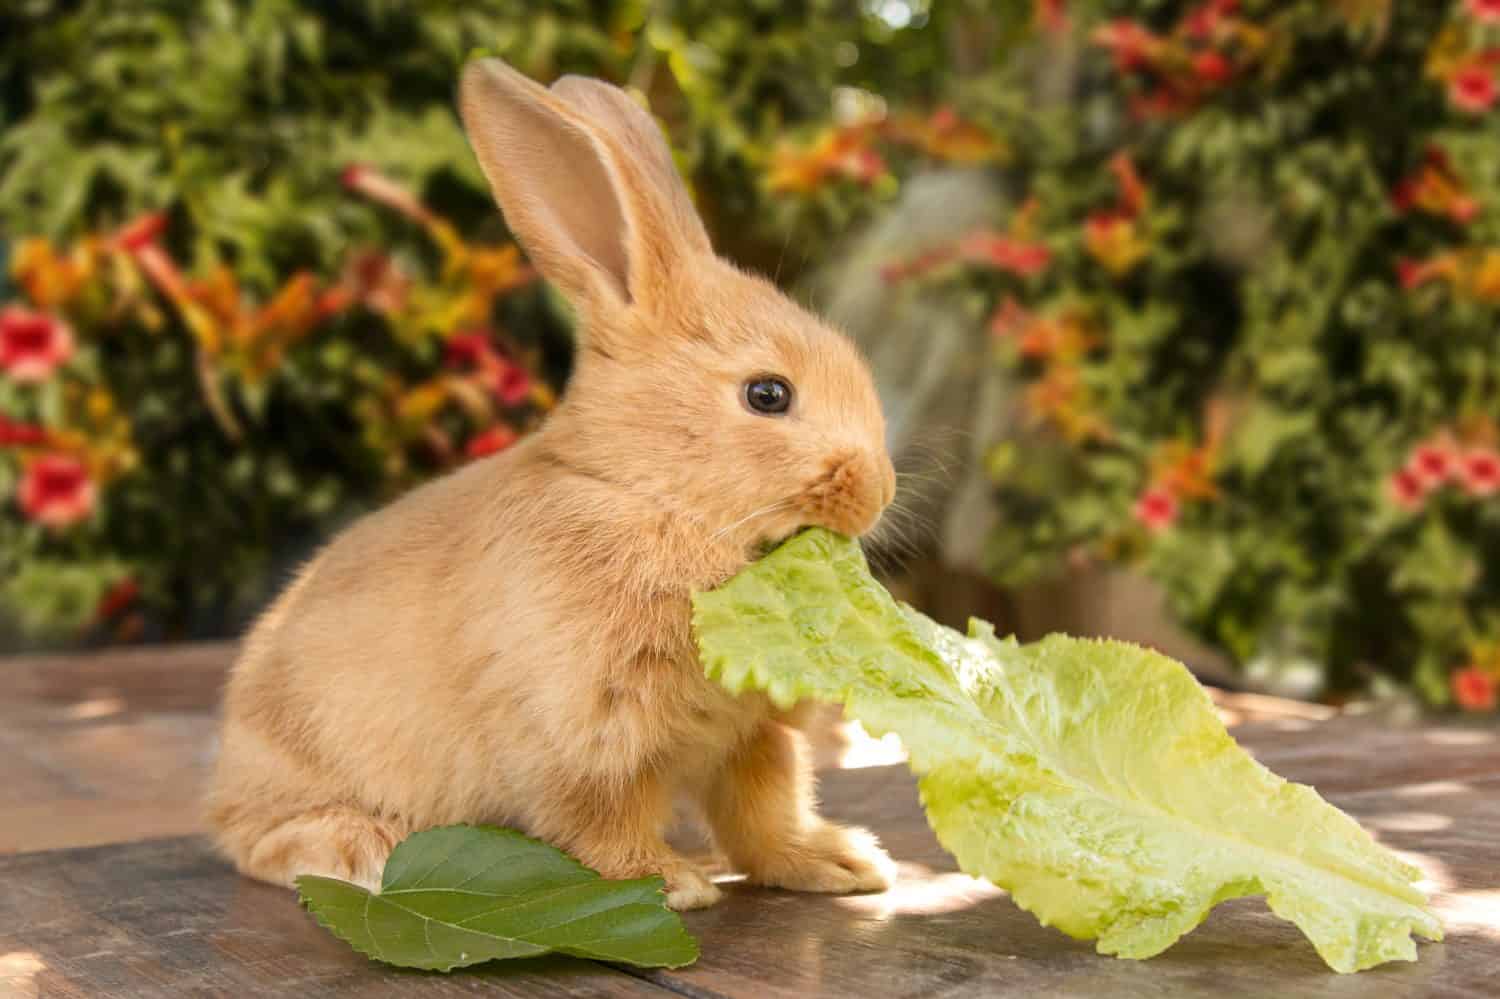 Cute rabbit, against a background of nature and flowers. Eating cabbage looks at the camera. Adorable little pets concept.blurred background